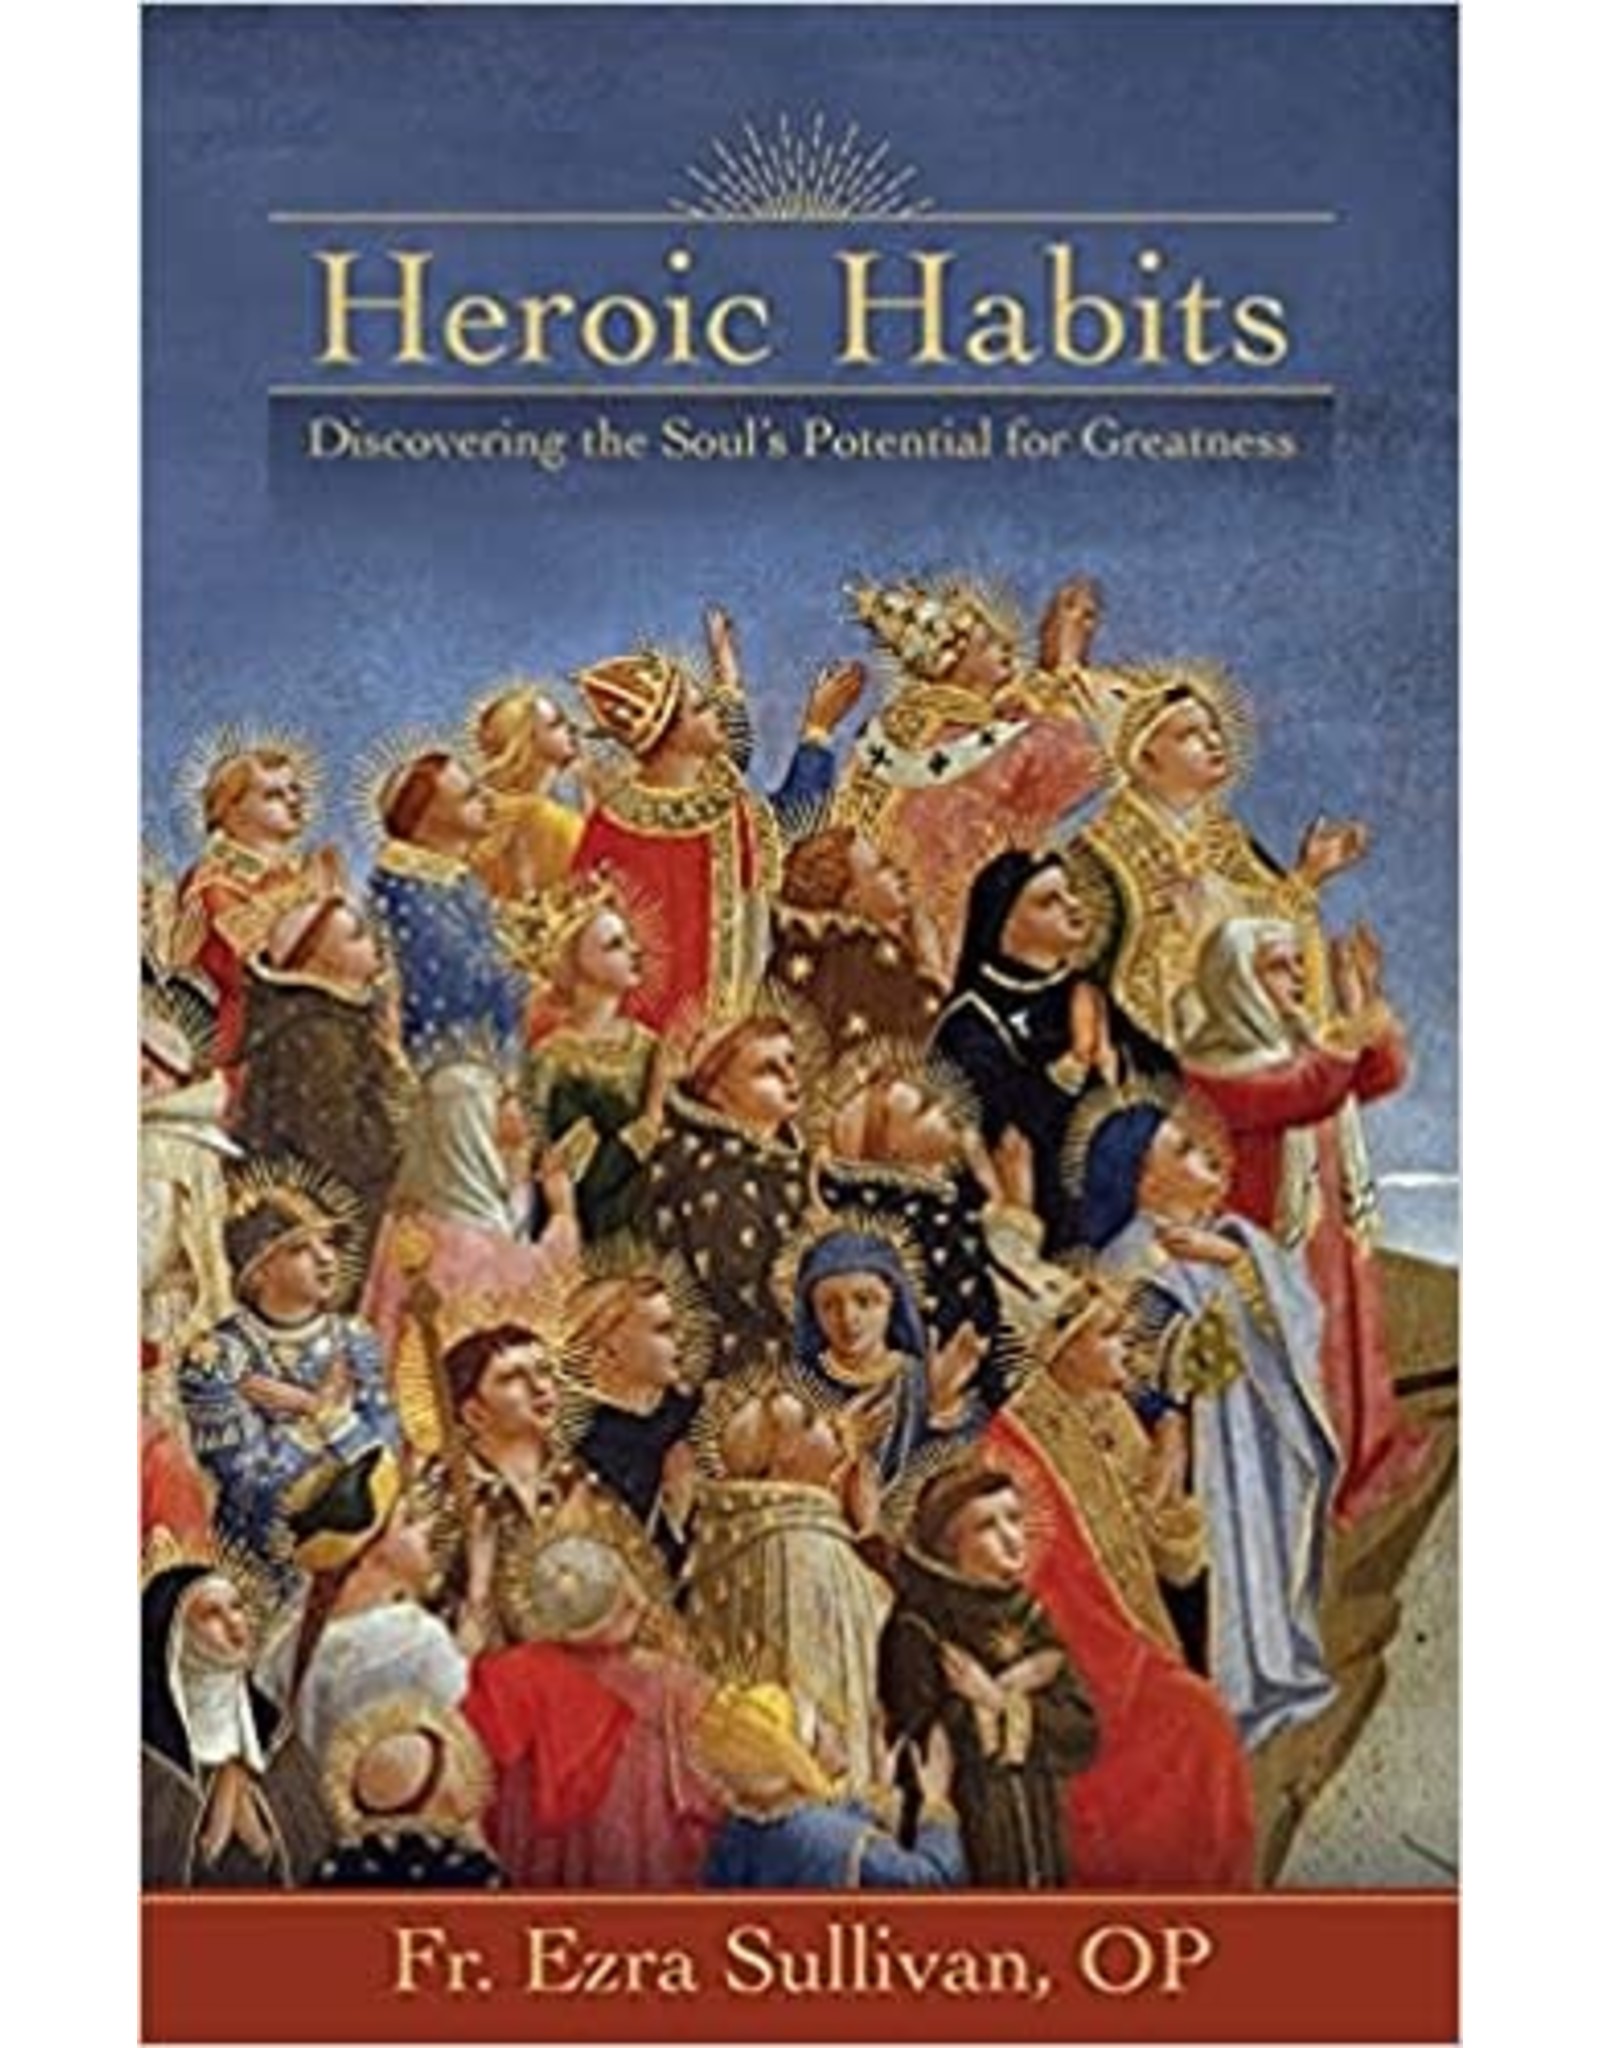 Heroic Habits: Discovering the Soul’s Potential for Greatness (Hardcover)